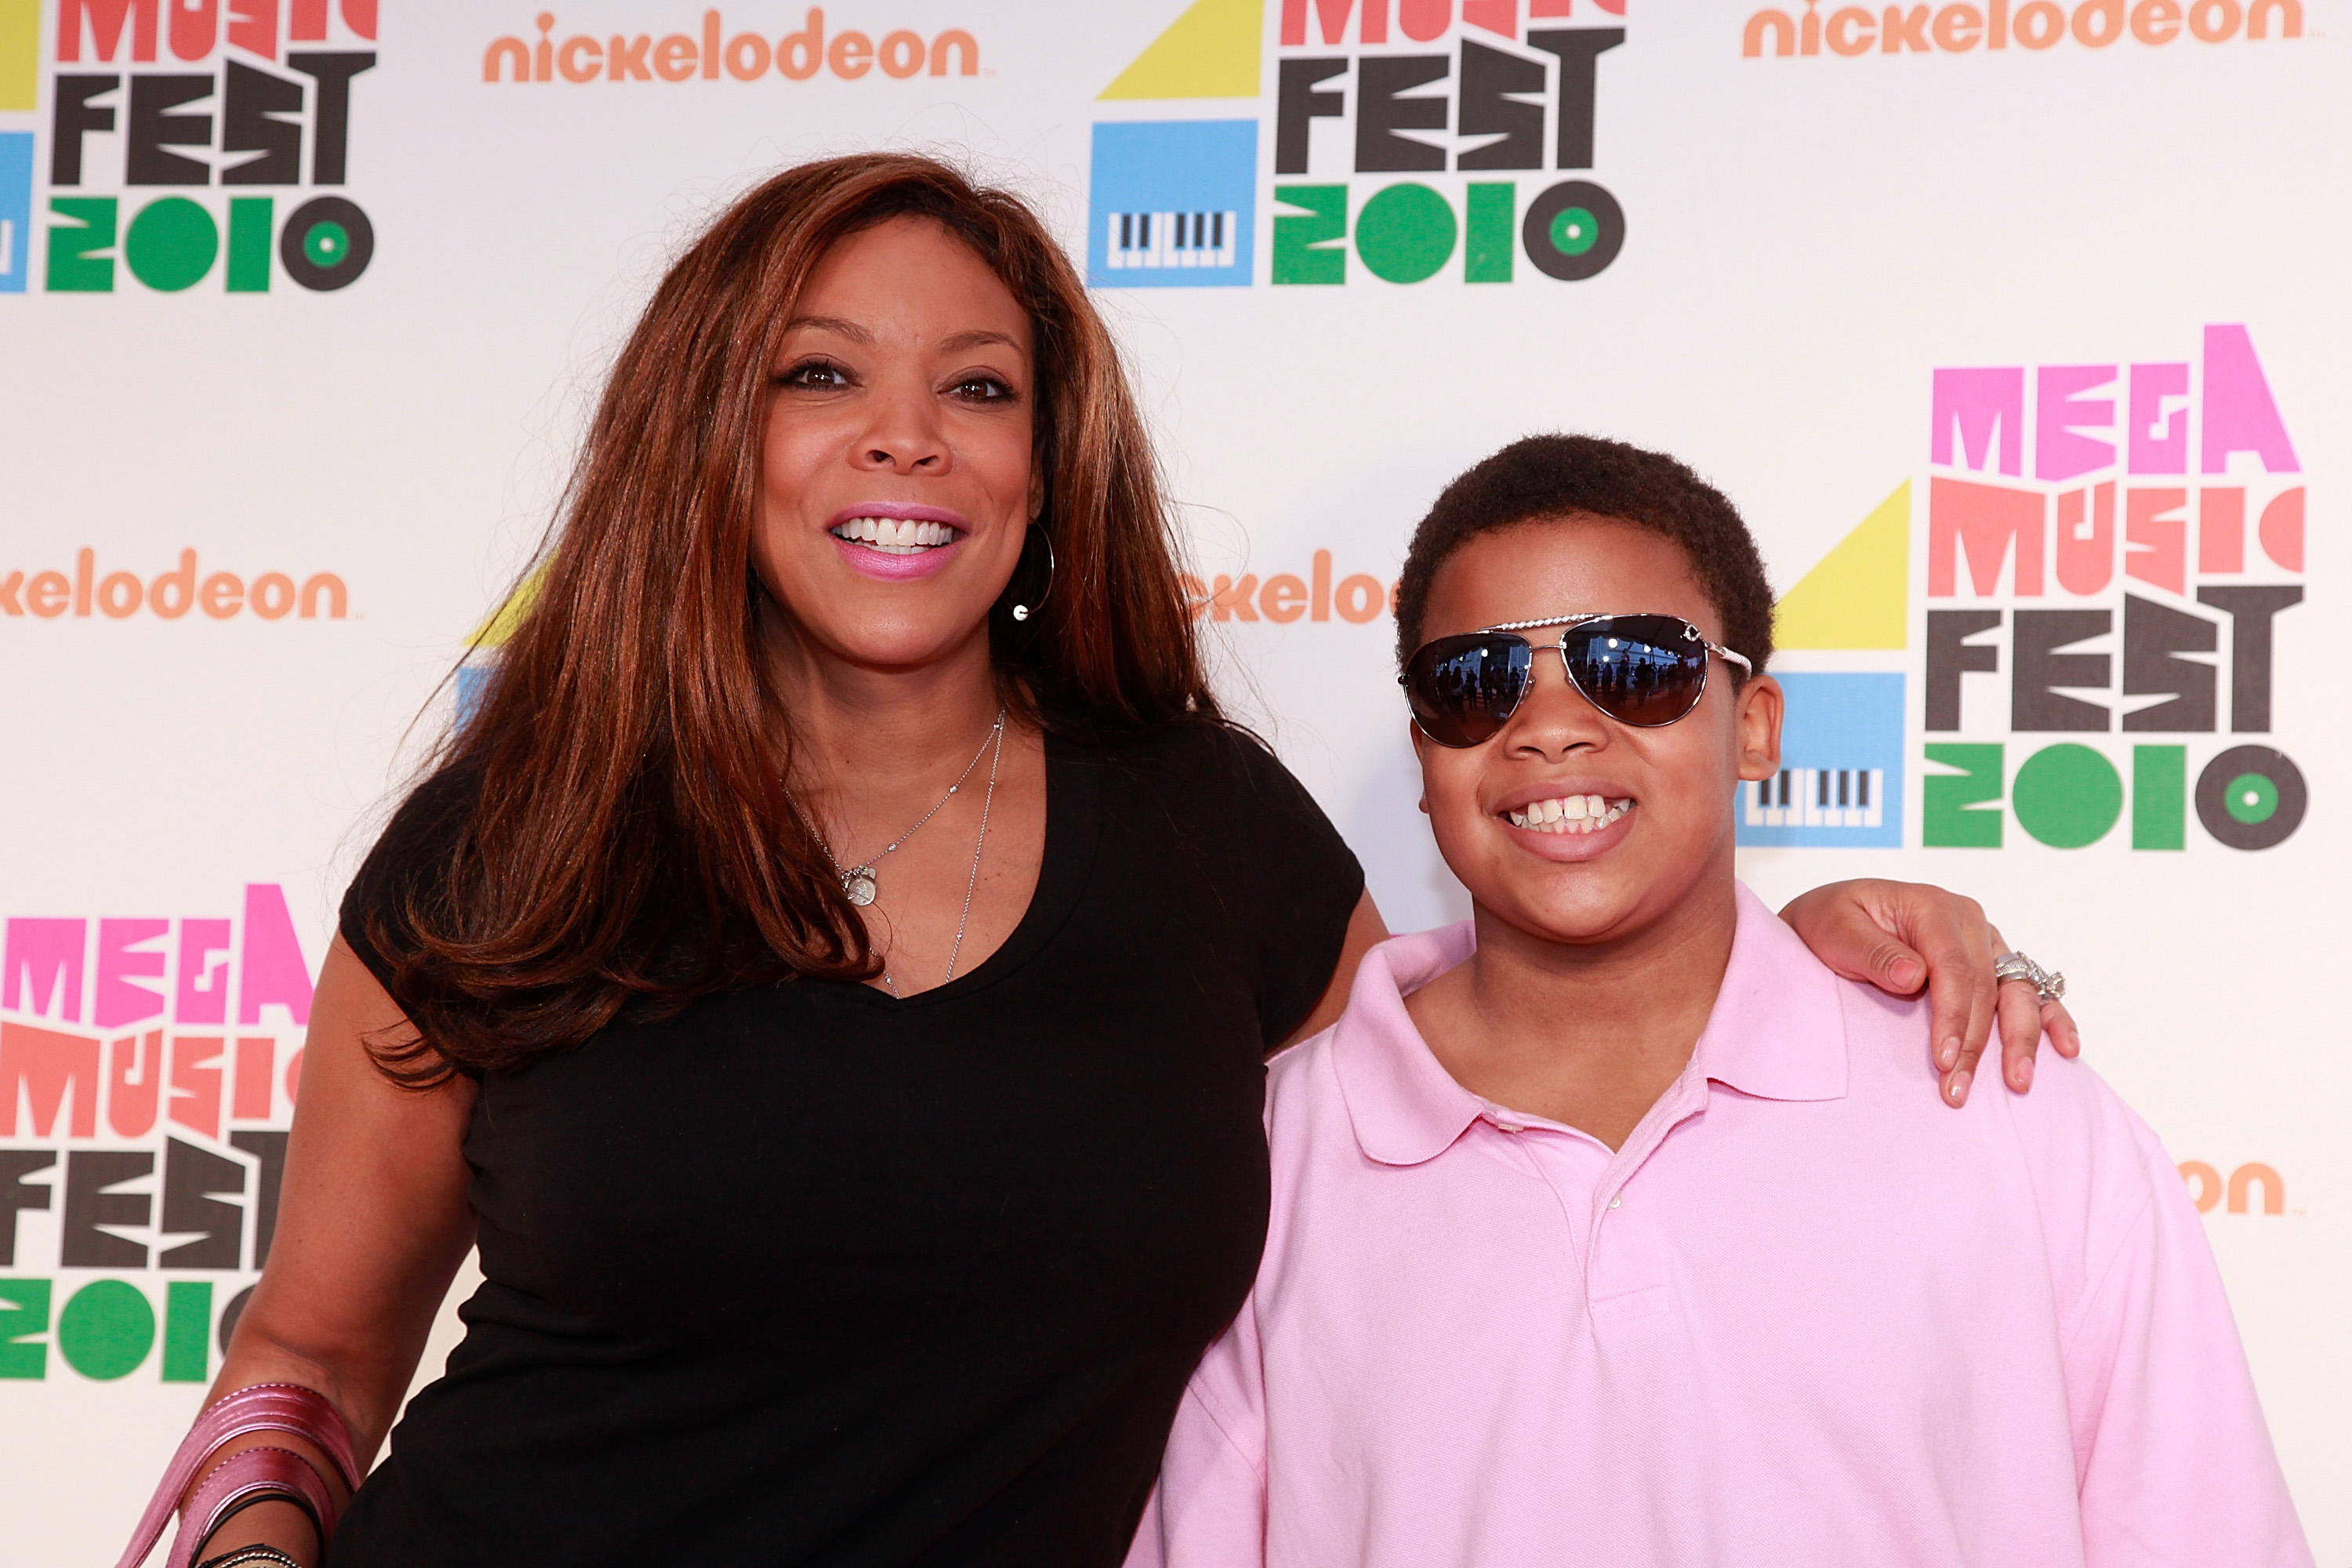 Wendy Williams and her son Kevin Hunter, Jr. at the Nickelodeon Mega Music Fest on May 22, 2010, in the Brooklyn borough of New York City | Source: Getty Images